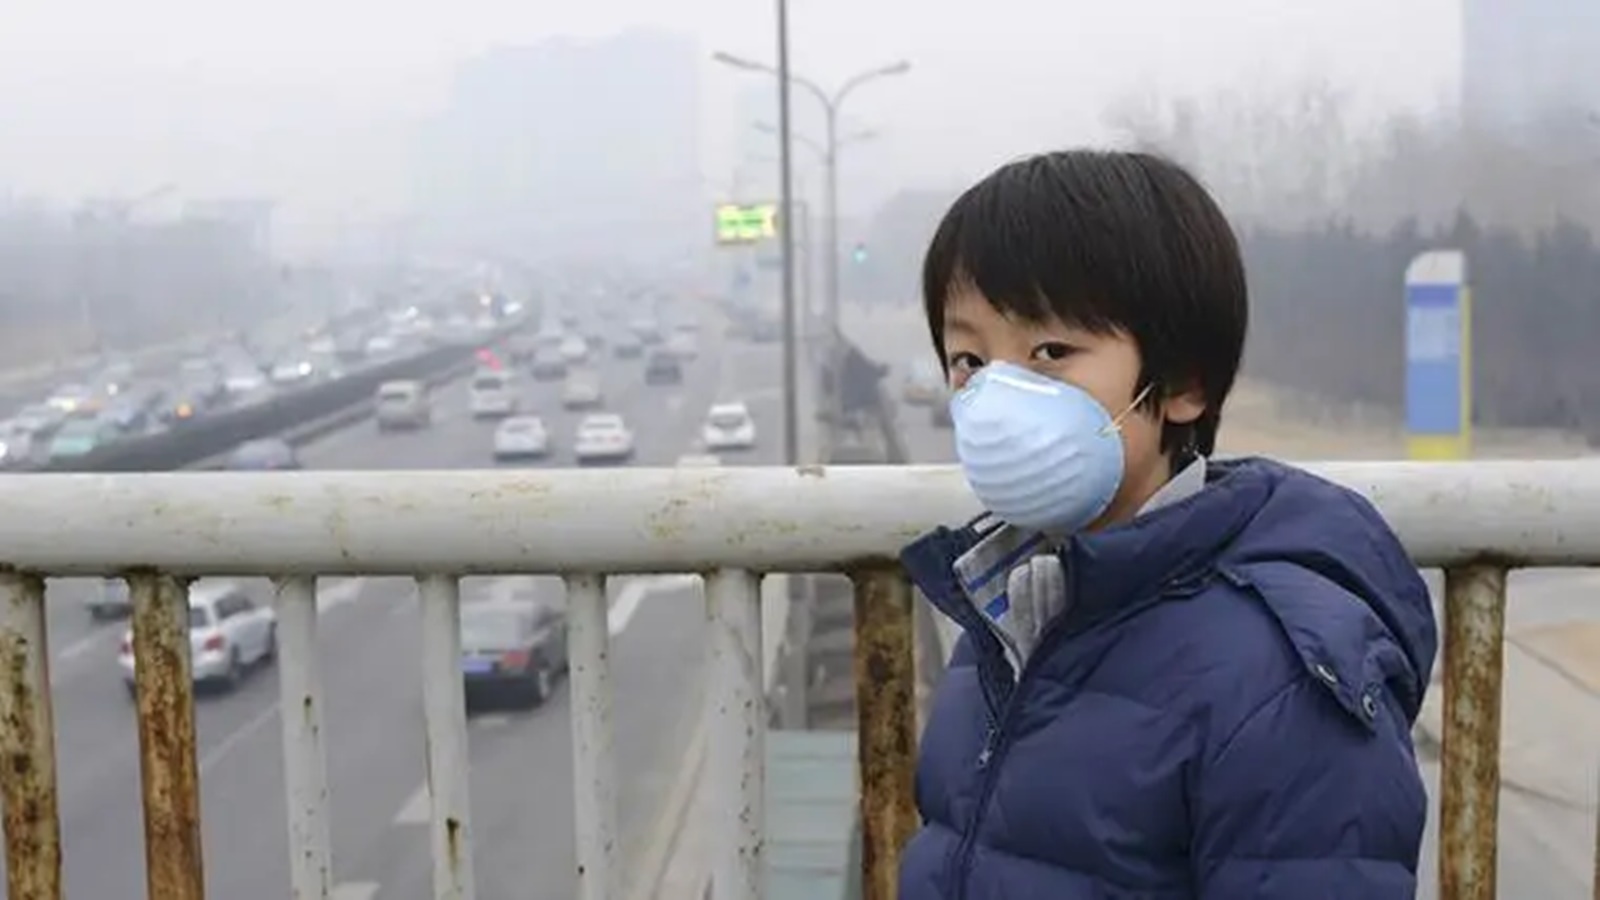 China misses air quality goals as economy takes priority: Report